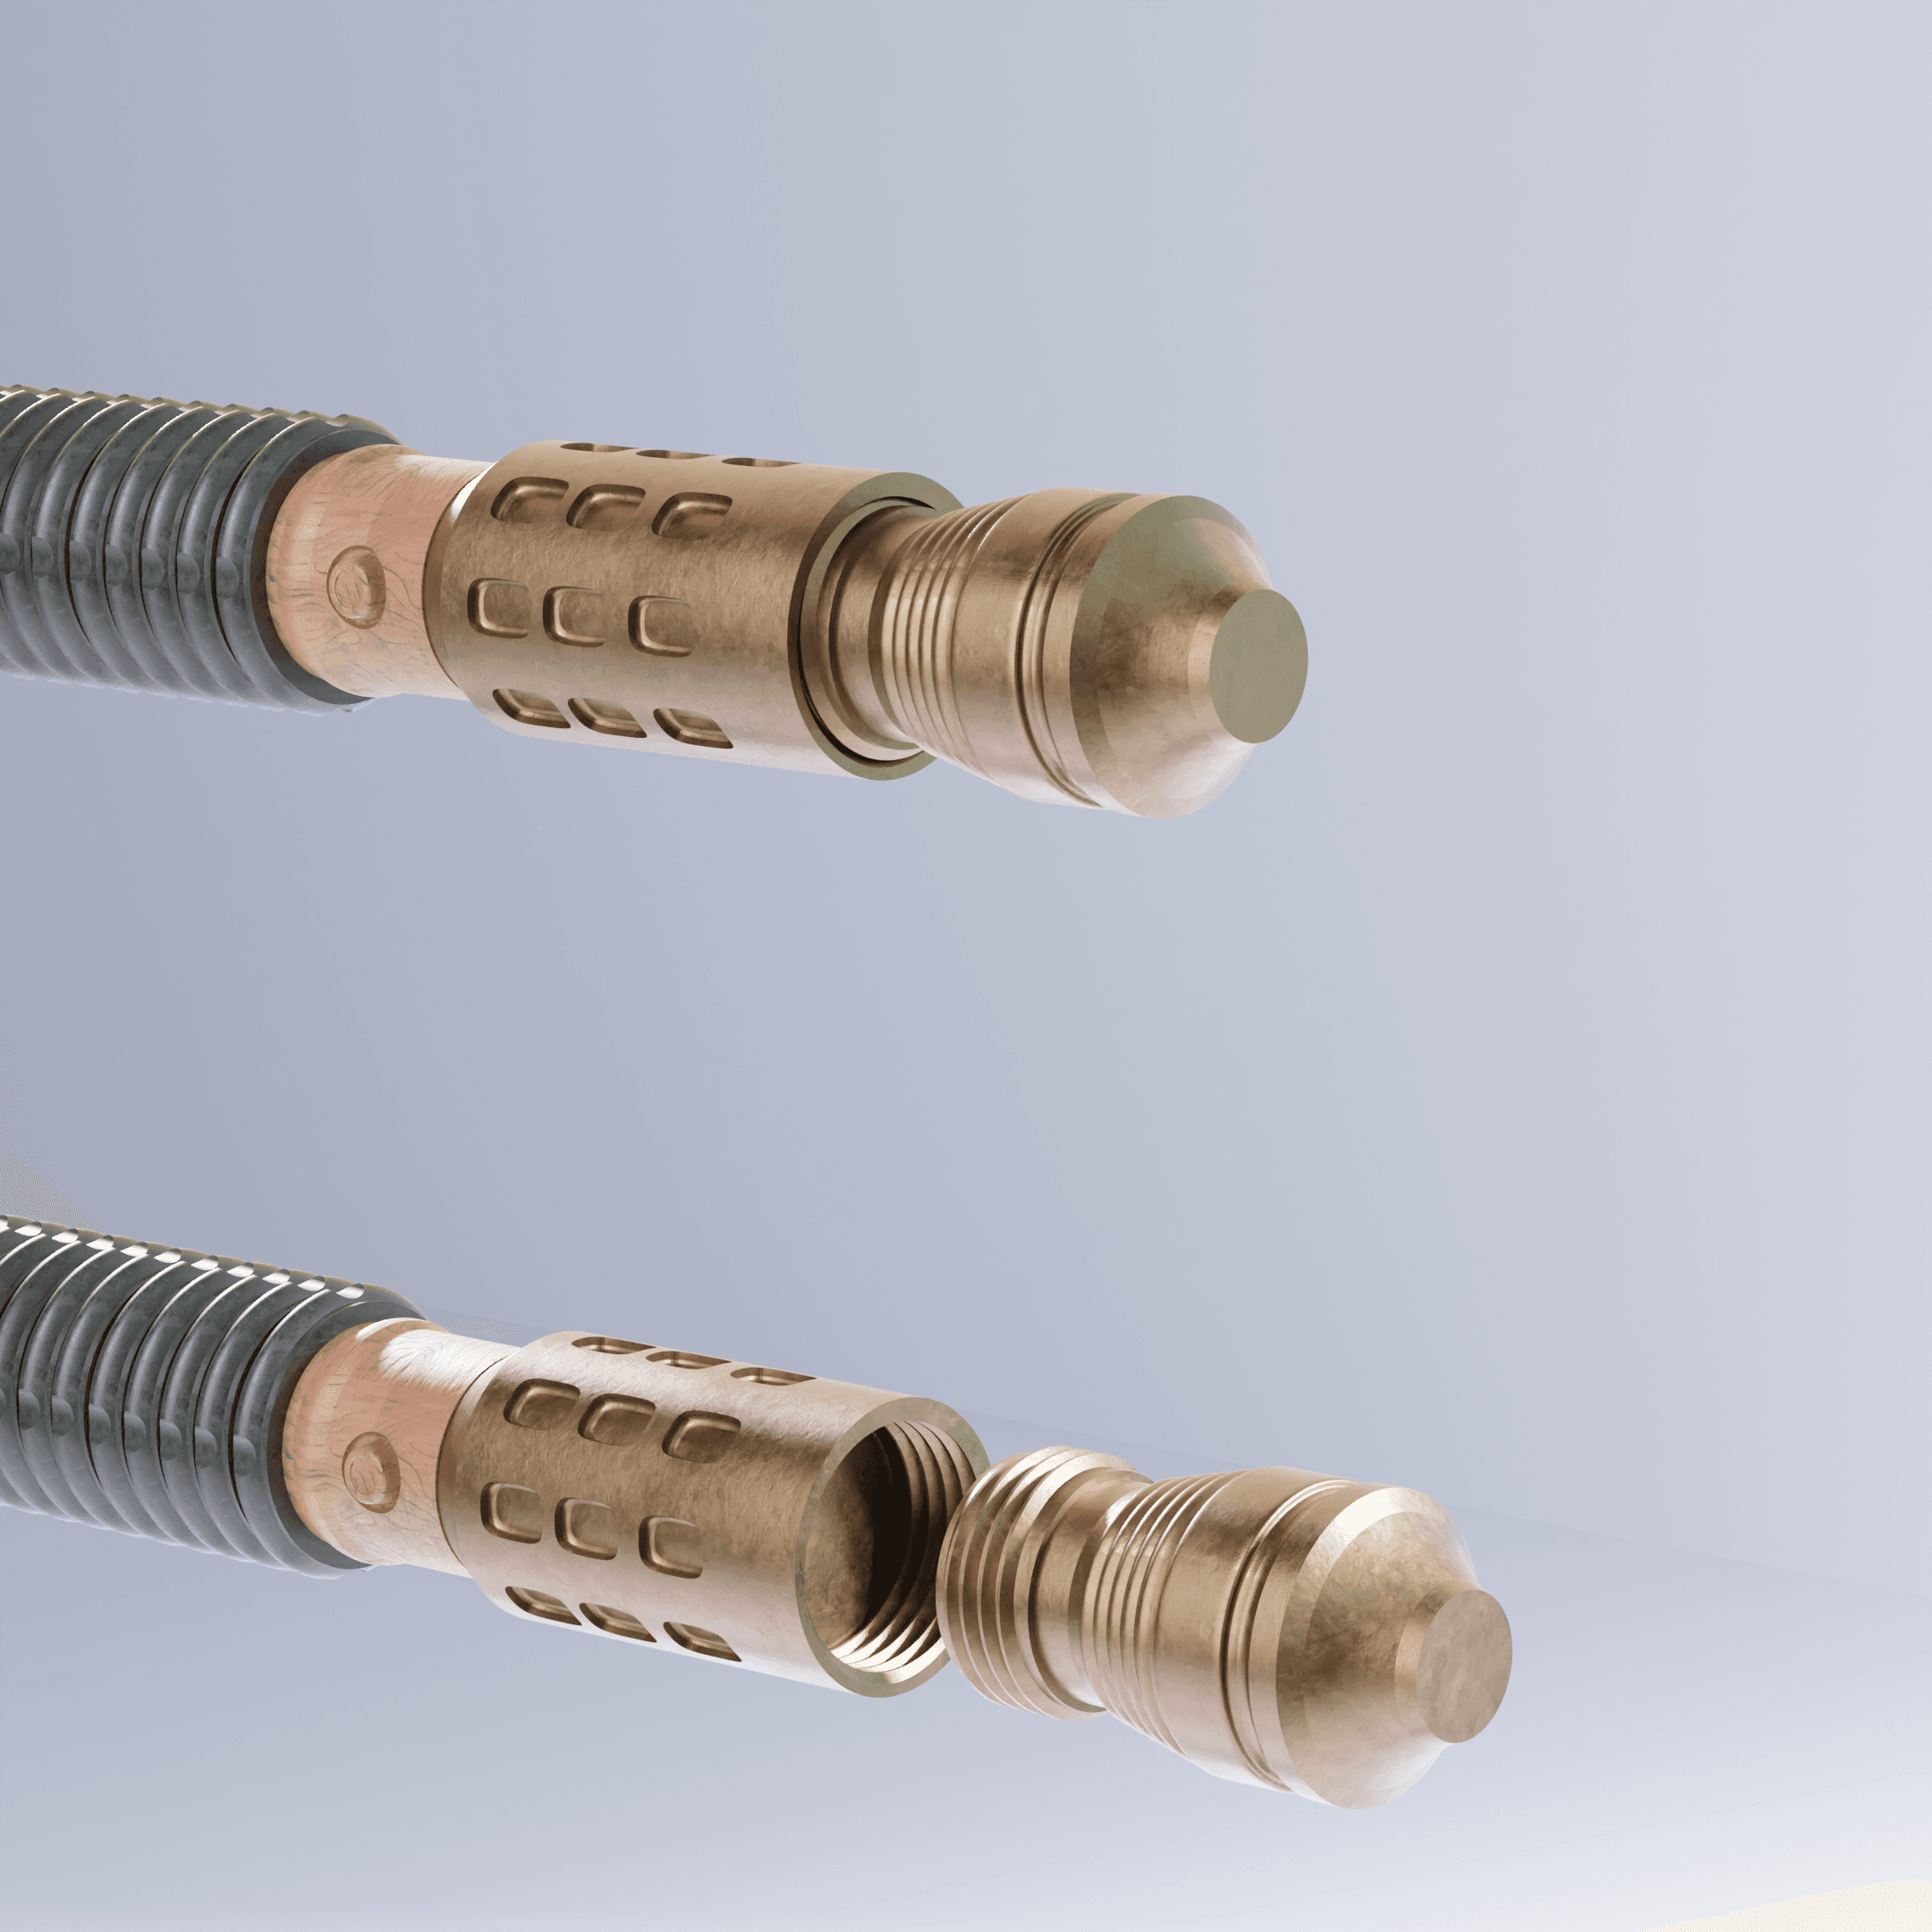 Print in Place Collapsing Jedi Lightsaber Concept 3 3d model